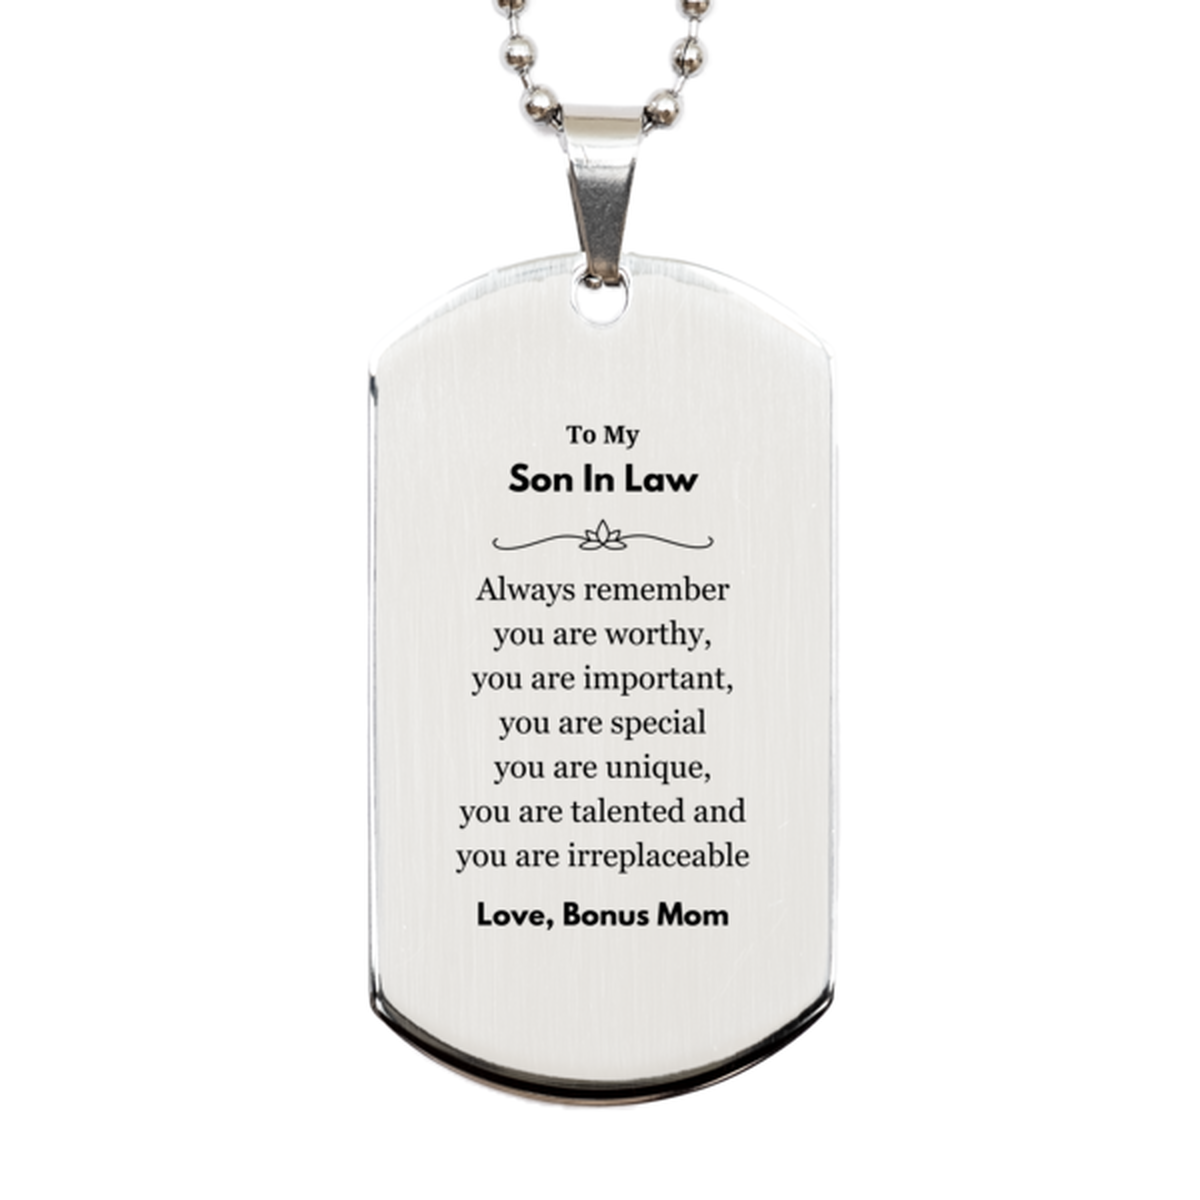 Son In Law Birthday Gifts from Bonus Mom, Inspirational Silver Dog Tag for Son In Law Christmas Graduation Gifts for Son In Law Always remember you are worthy, you are important. Love, Bonus Mom